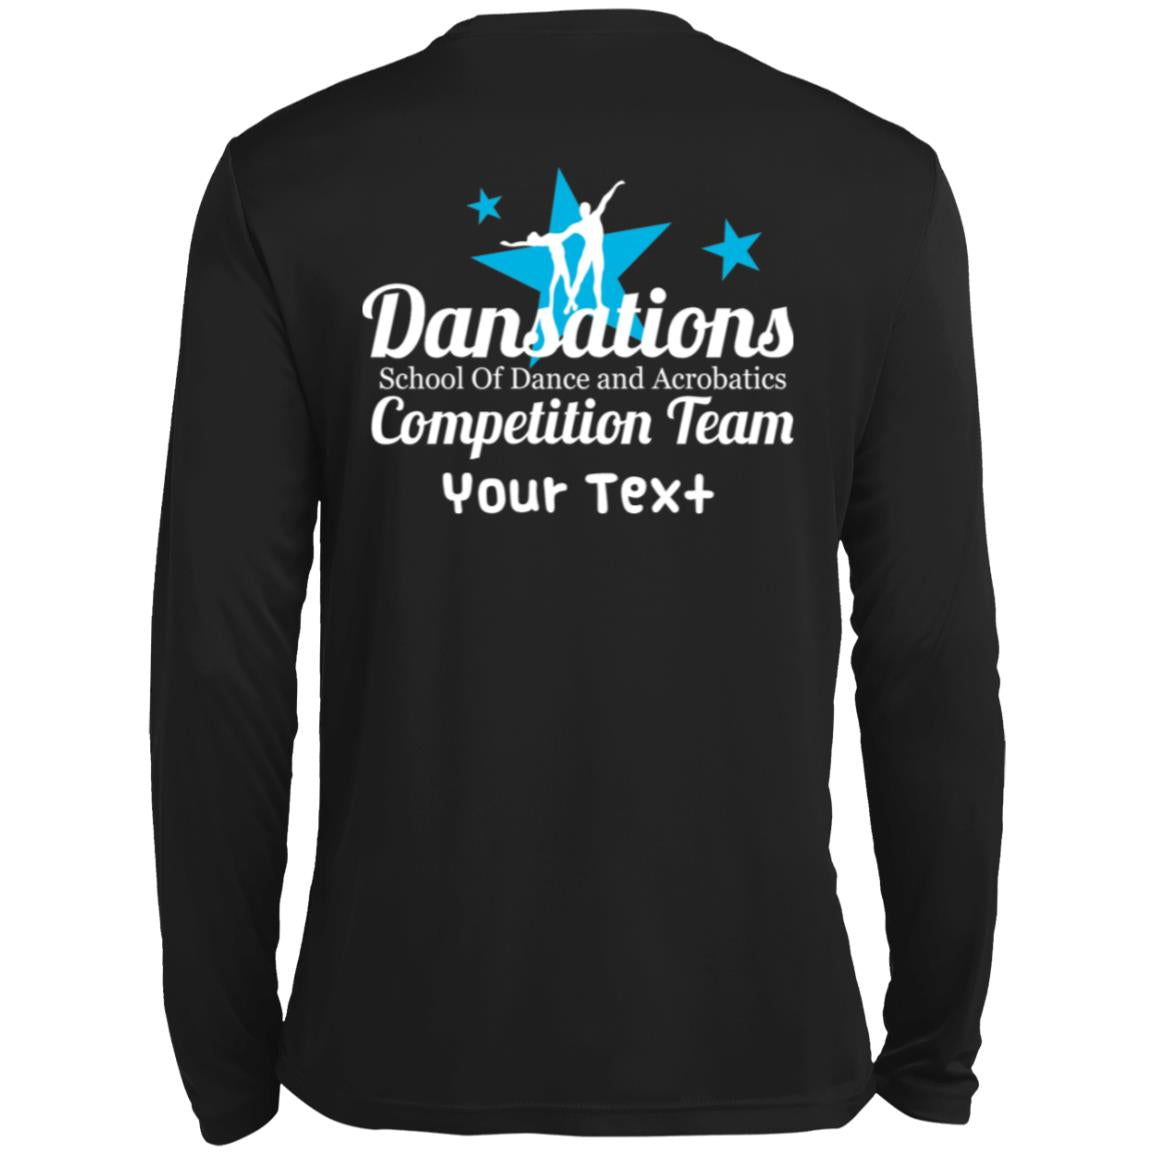 Dansations Competition Team Long Sleeve Performance Tee